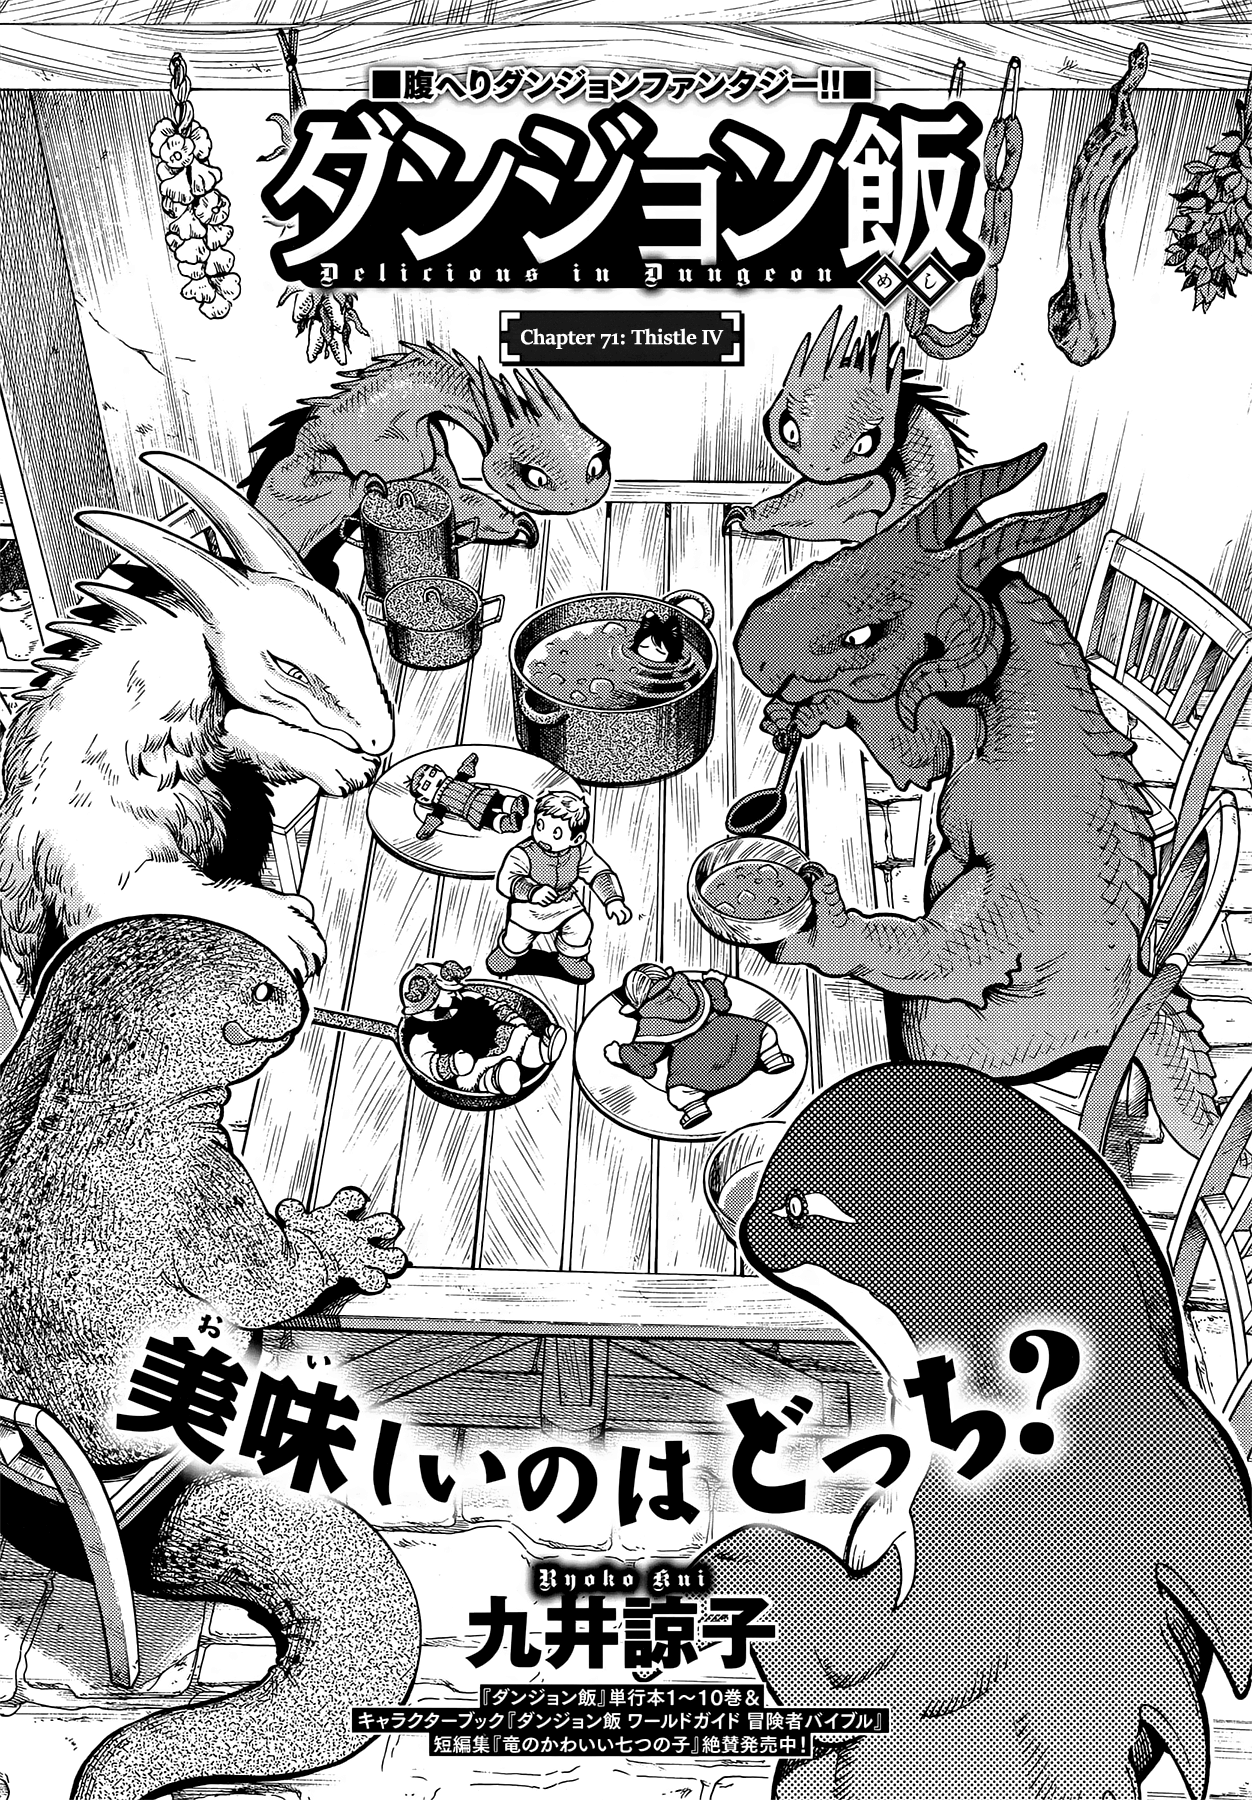 Dungeon Meshi Vol.11-Chapter.71-Thistle-IV Image